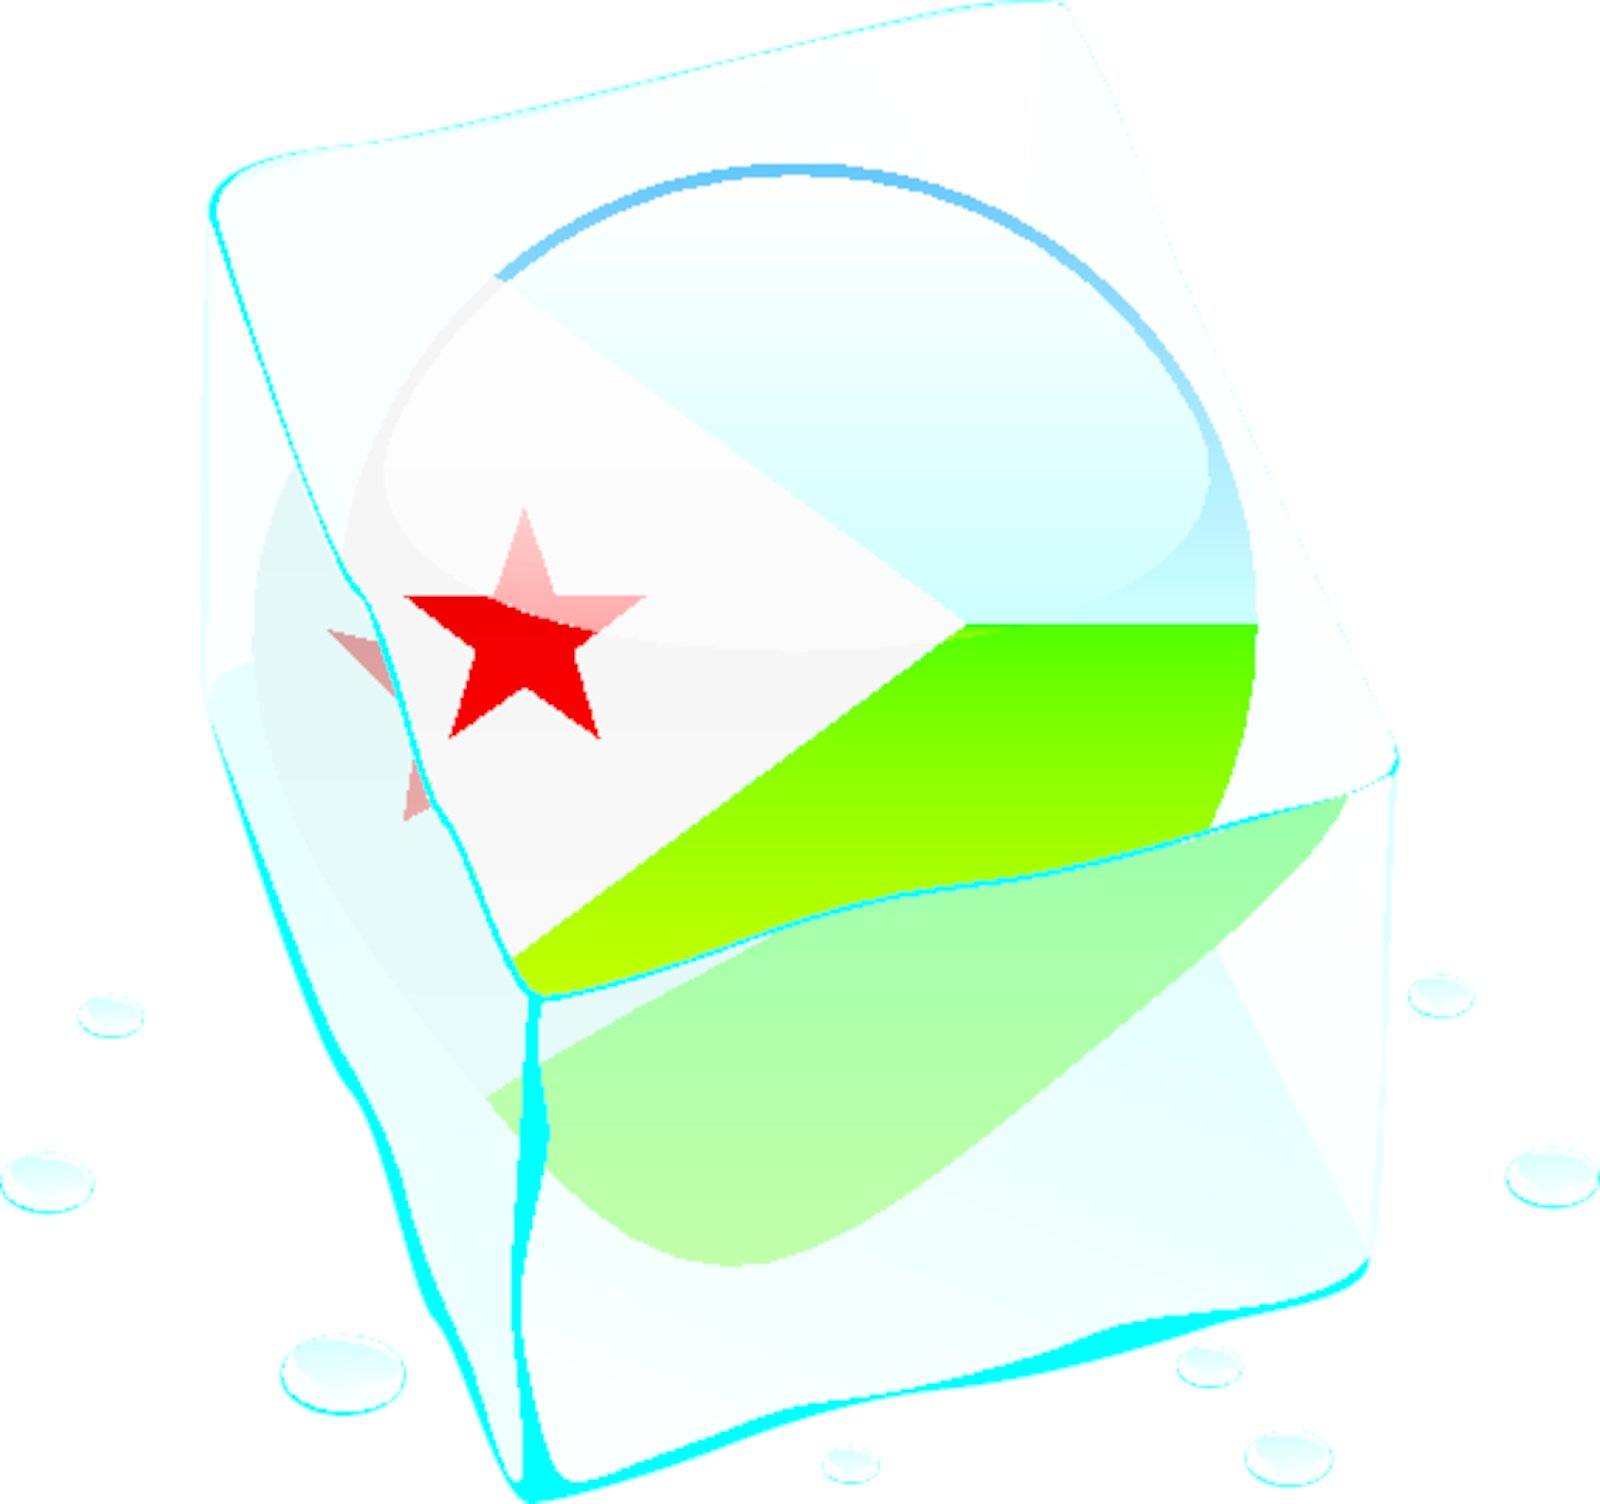 fully editable vector illustration of djibouti button flag frozen in ice cube